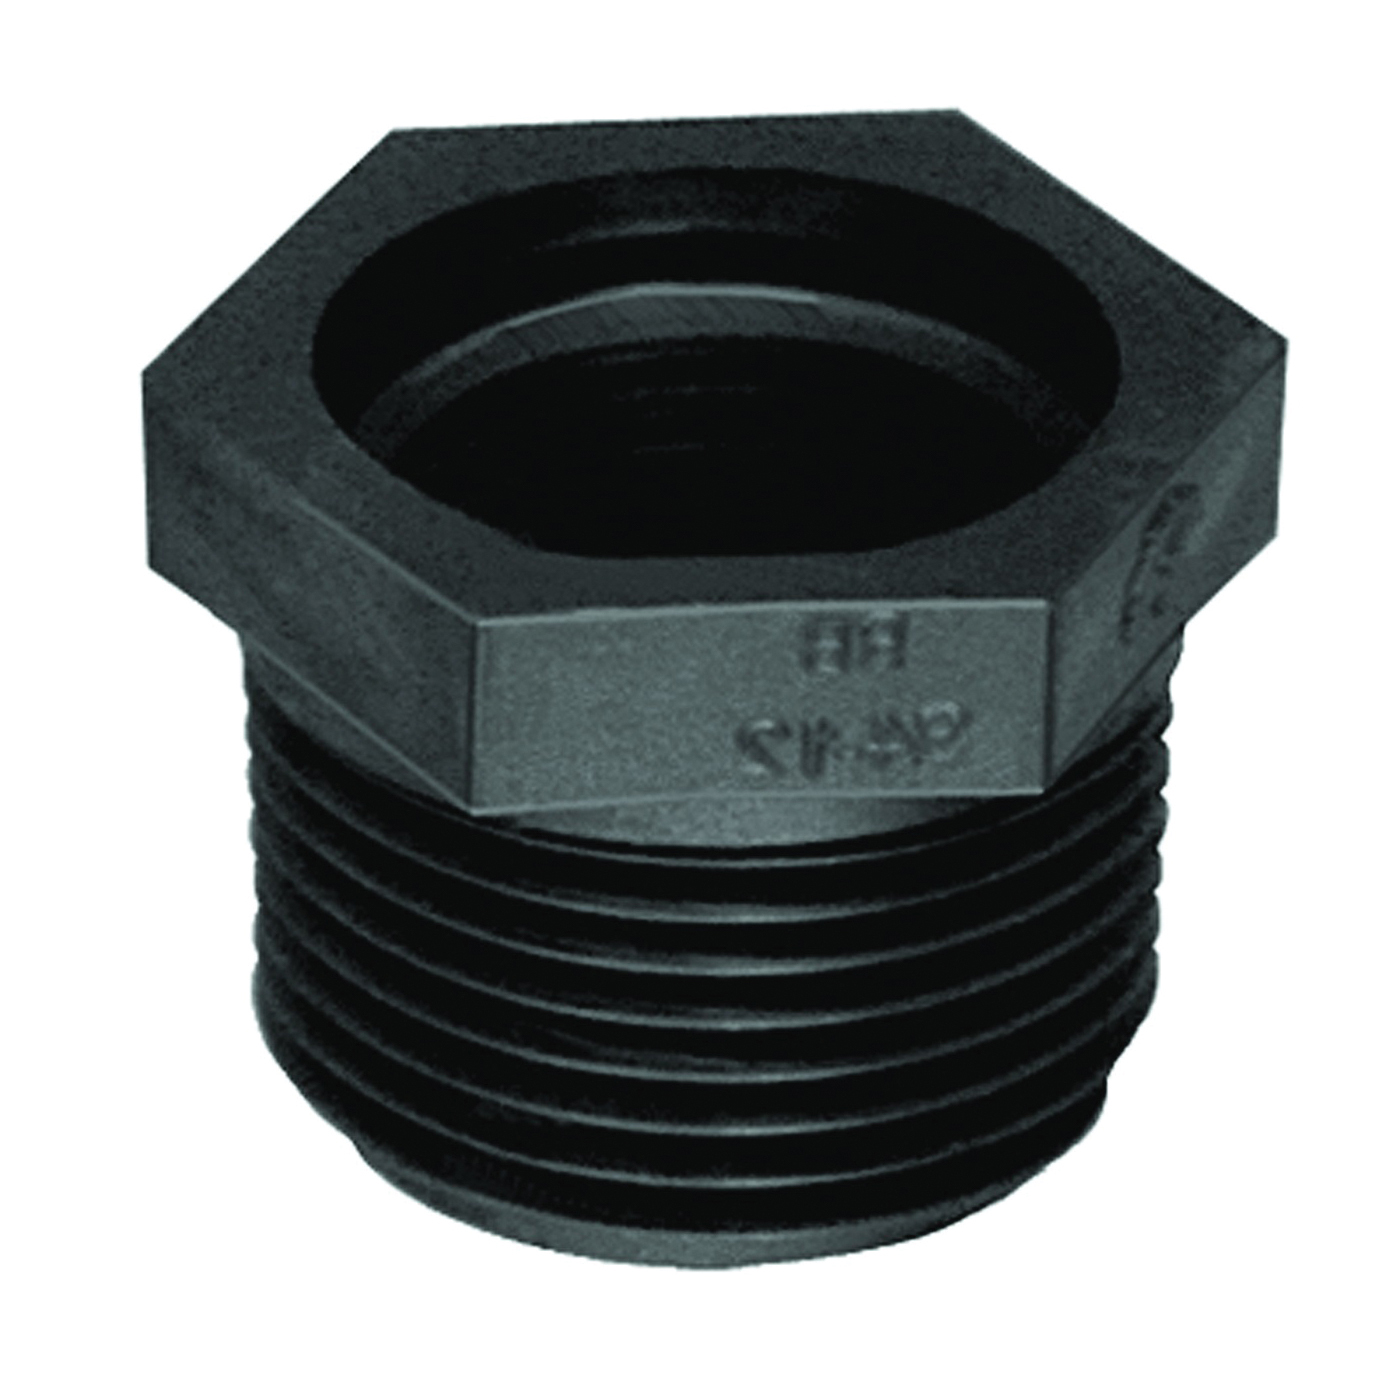 RB300-200P Reducing Pipe Bushing, 3 x 2 in, MPT x FPT, Black